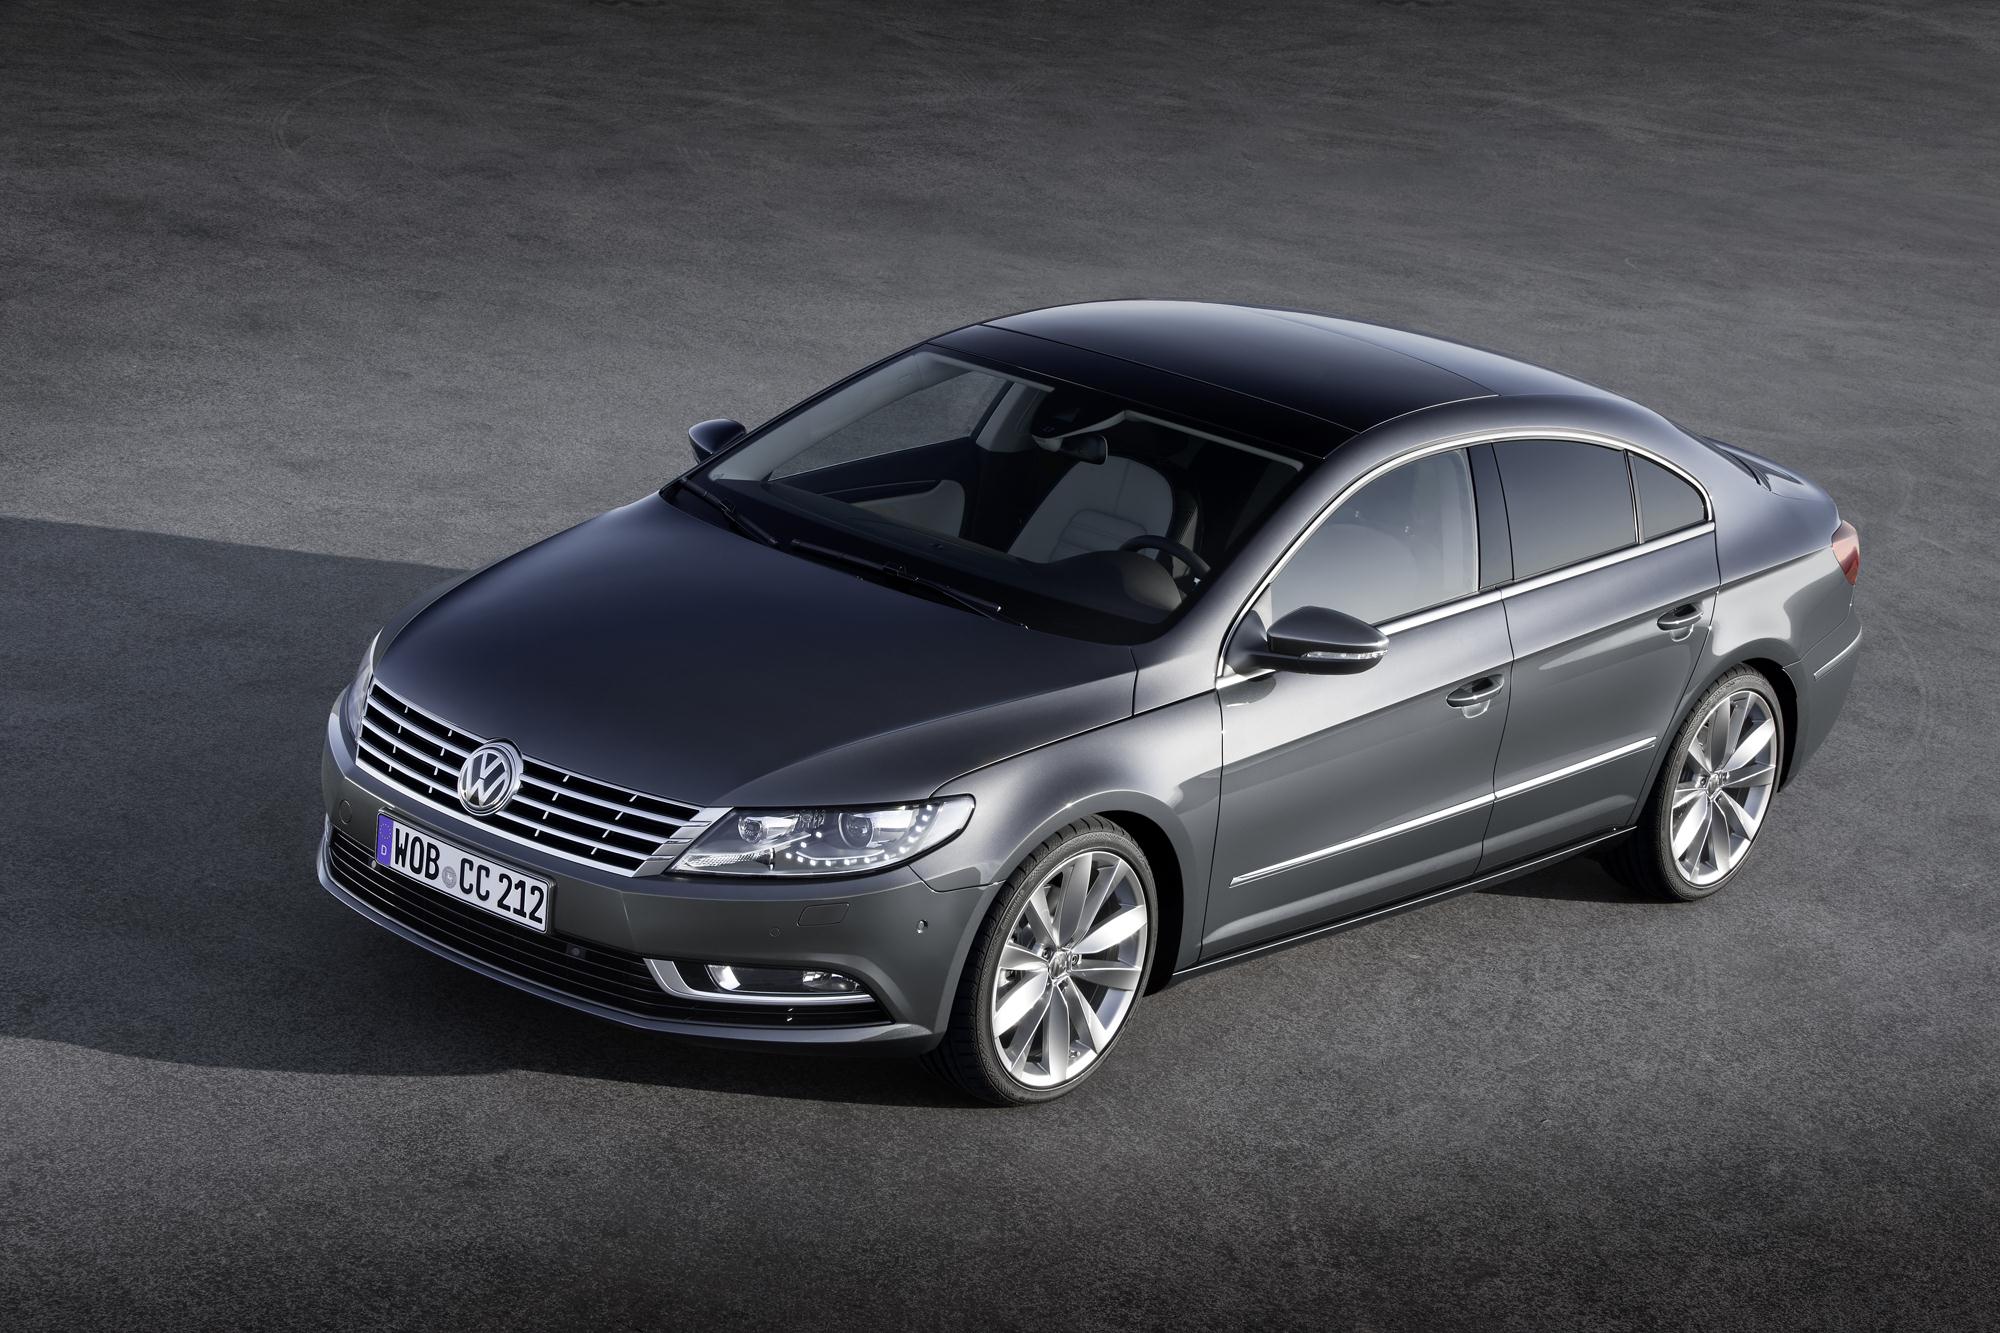 2013 Volkswagen Cc Vw Review Ratings Specs Prices And